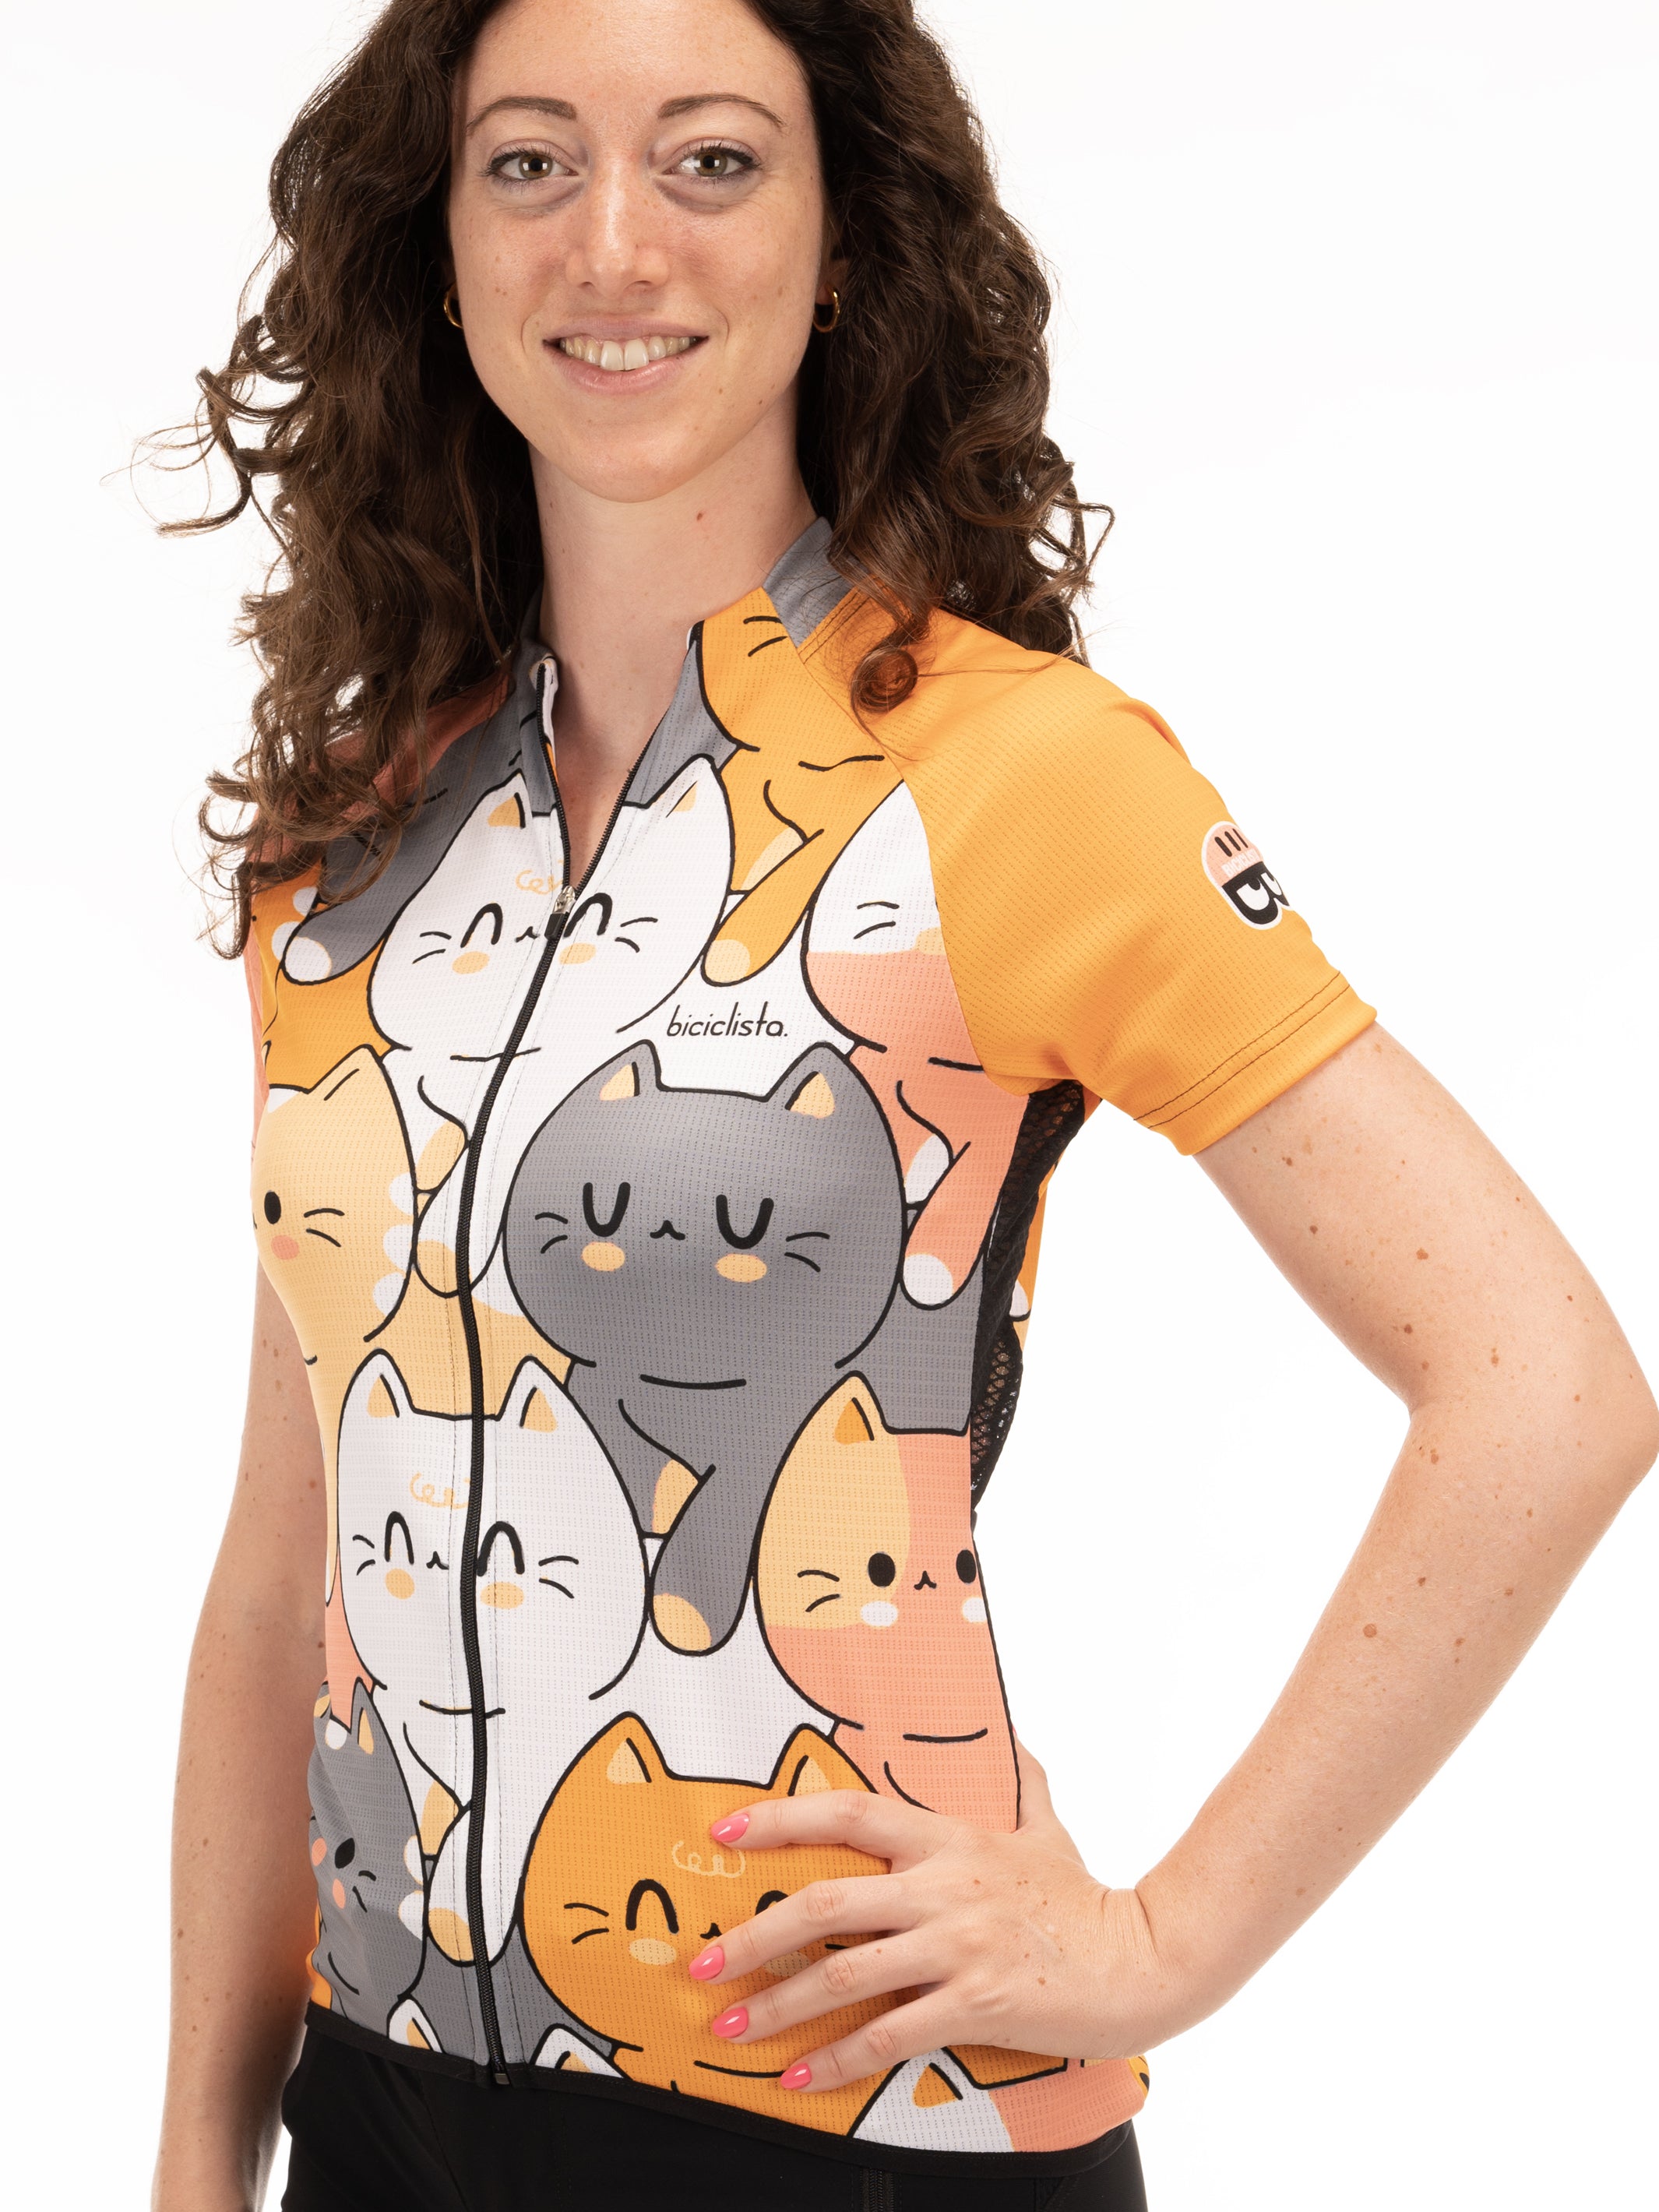 ANOTHER CAT JERSEY - Women's Right-on Jersey